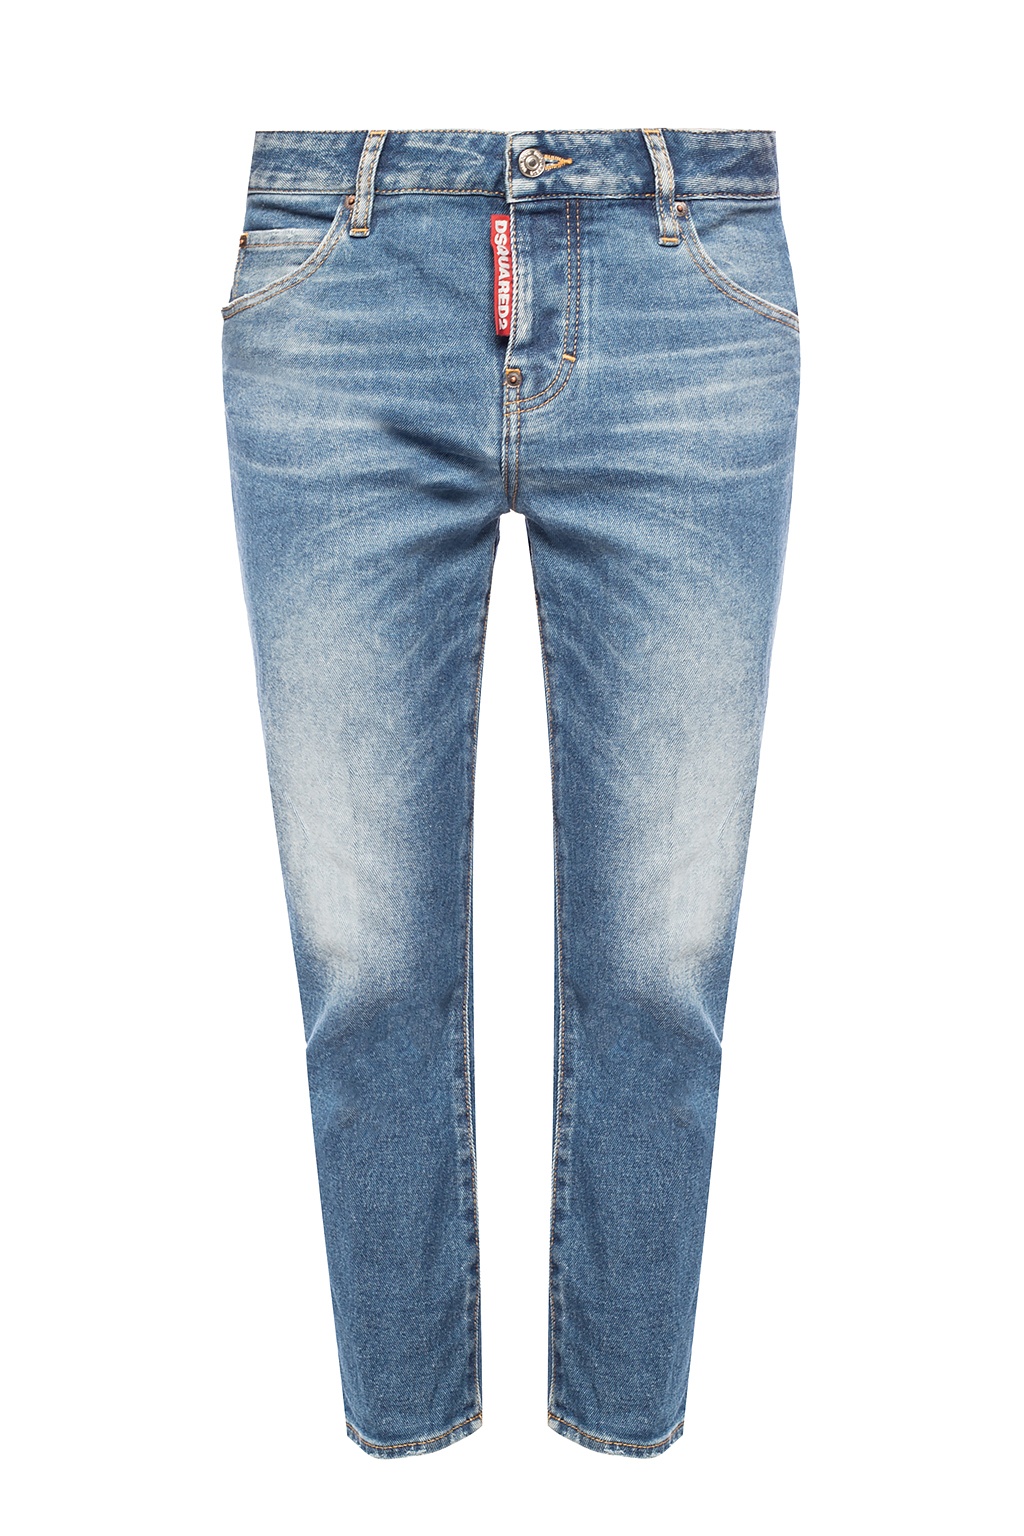 jeans similar to dsquared2